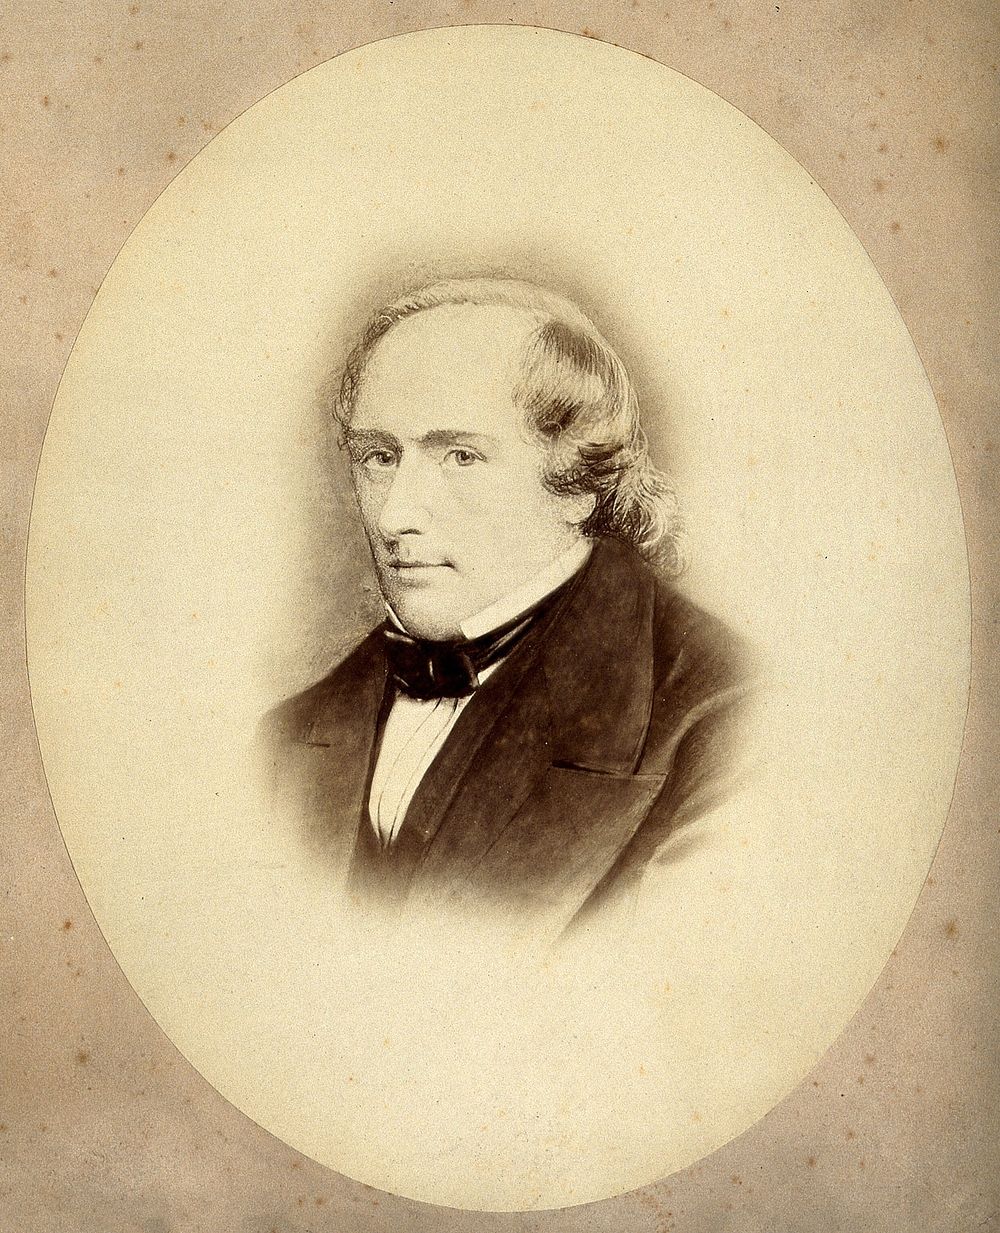 William Stokes. Photograph after a print.